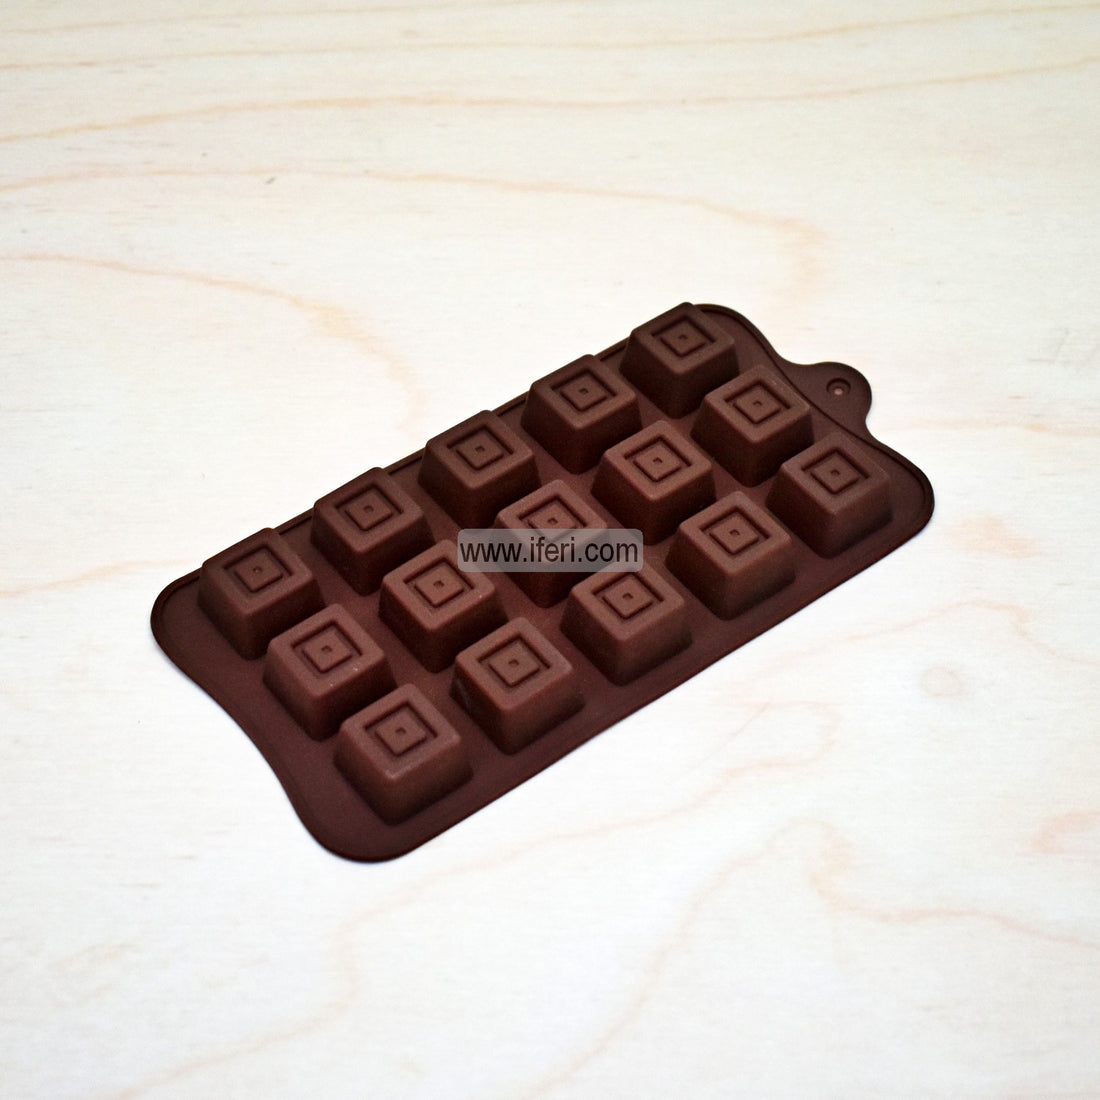 Buy Silicone Chocolate Mold through online from iferi.com in Bangladesh